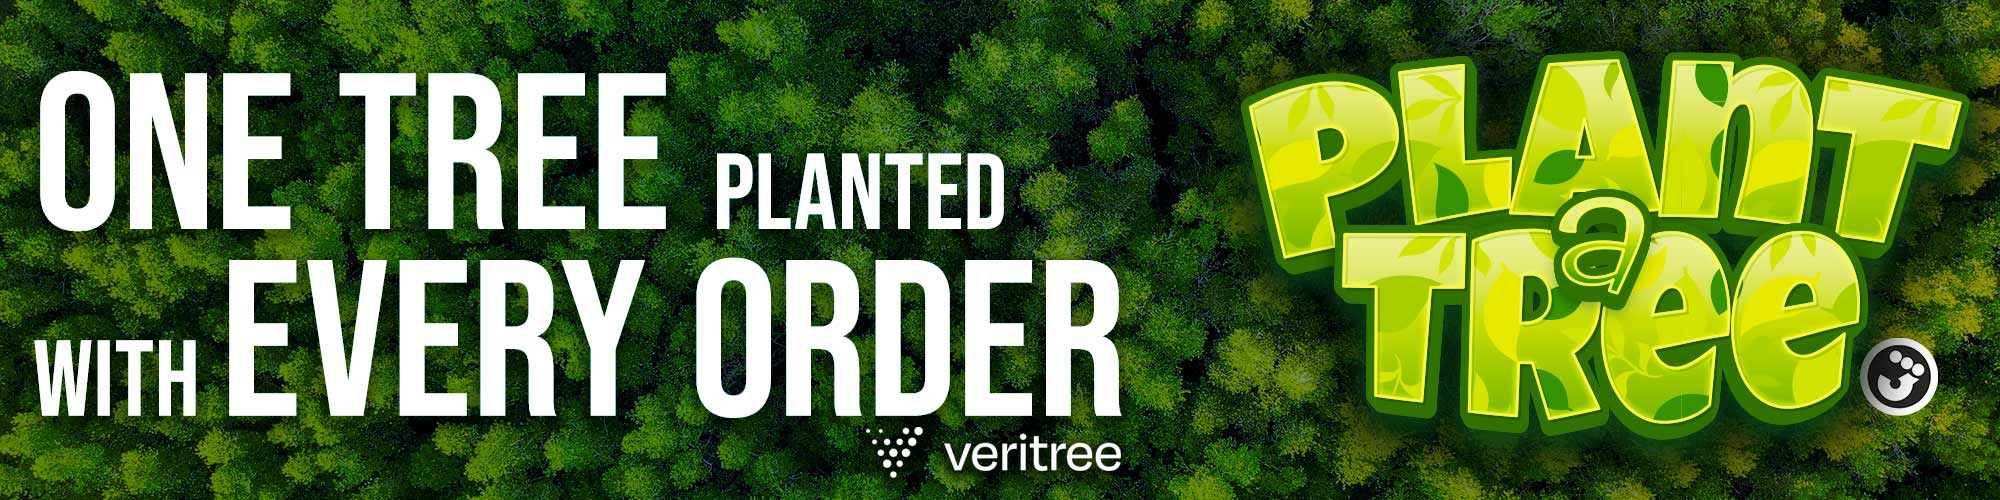 Veritree Plants One Tree For Every Order Placed